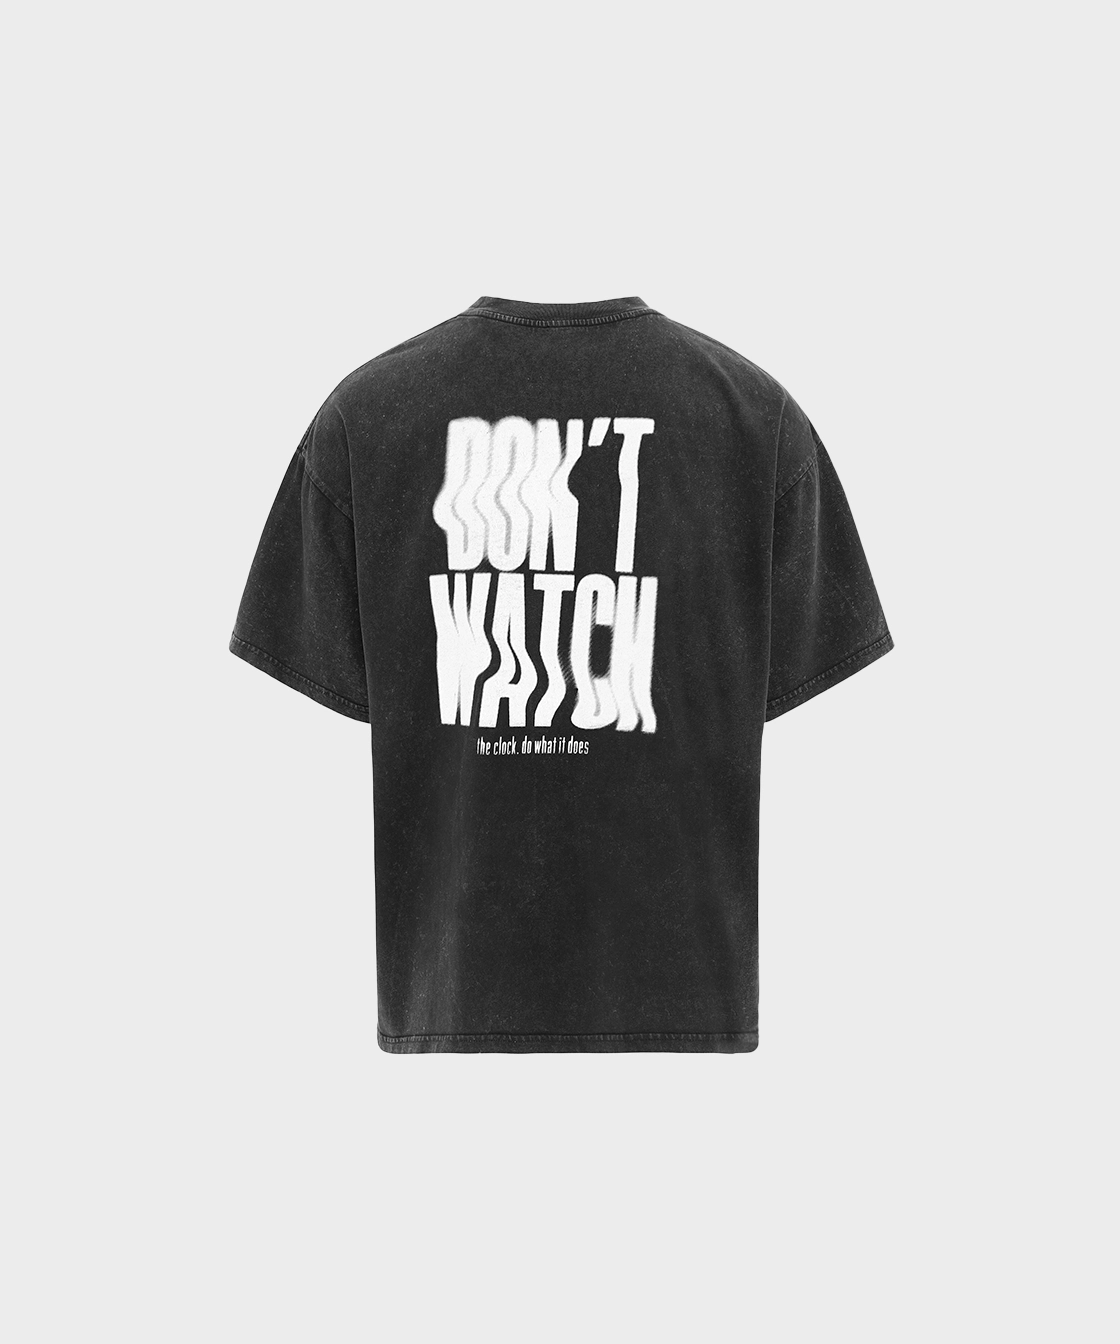 Don't watch t-shirt - black fade out